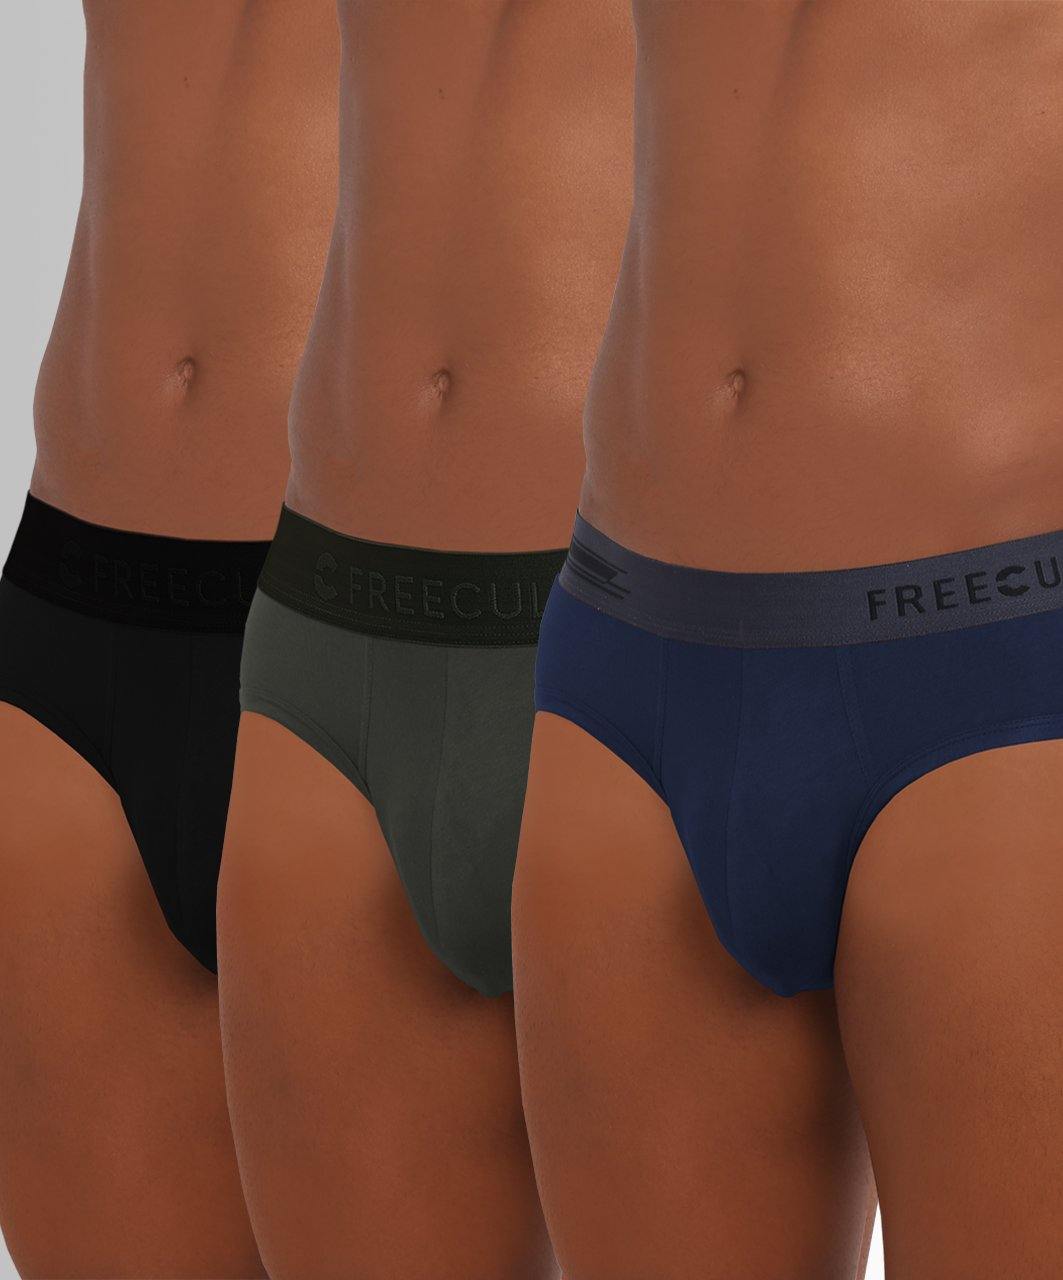 Brief- Limited Edition (Pack of 3) - freecultr.com